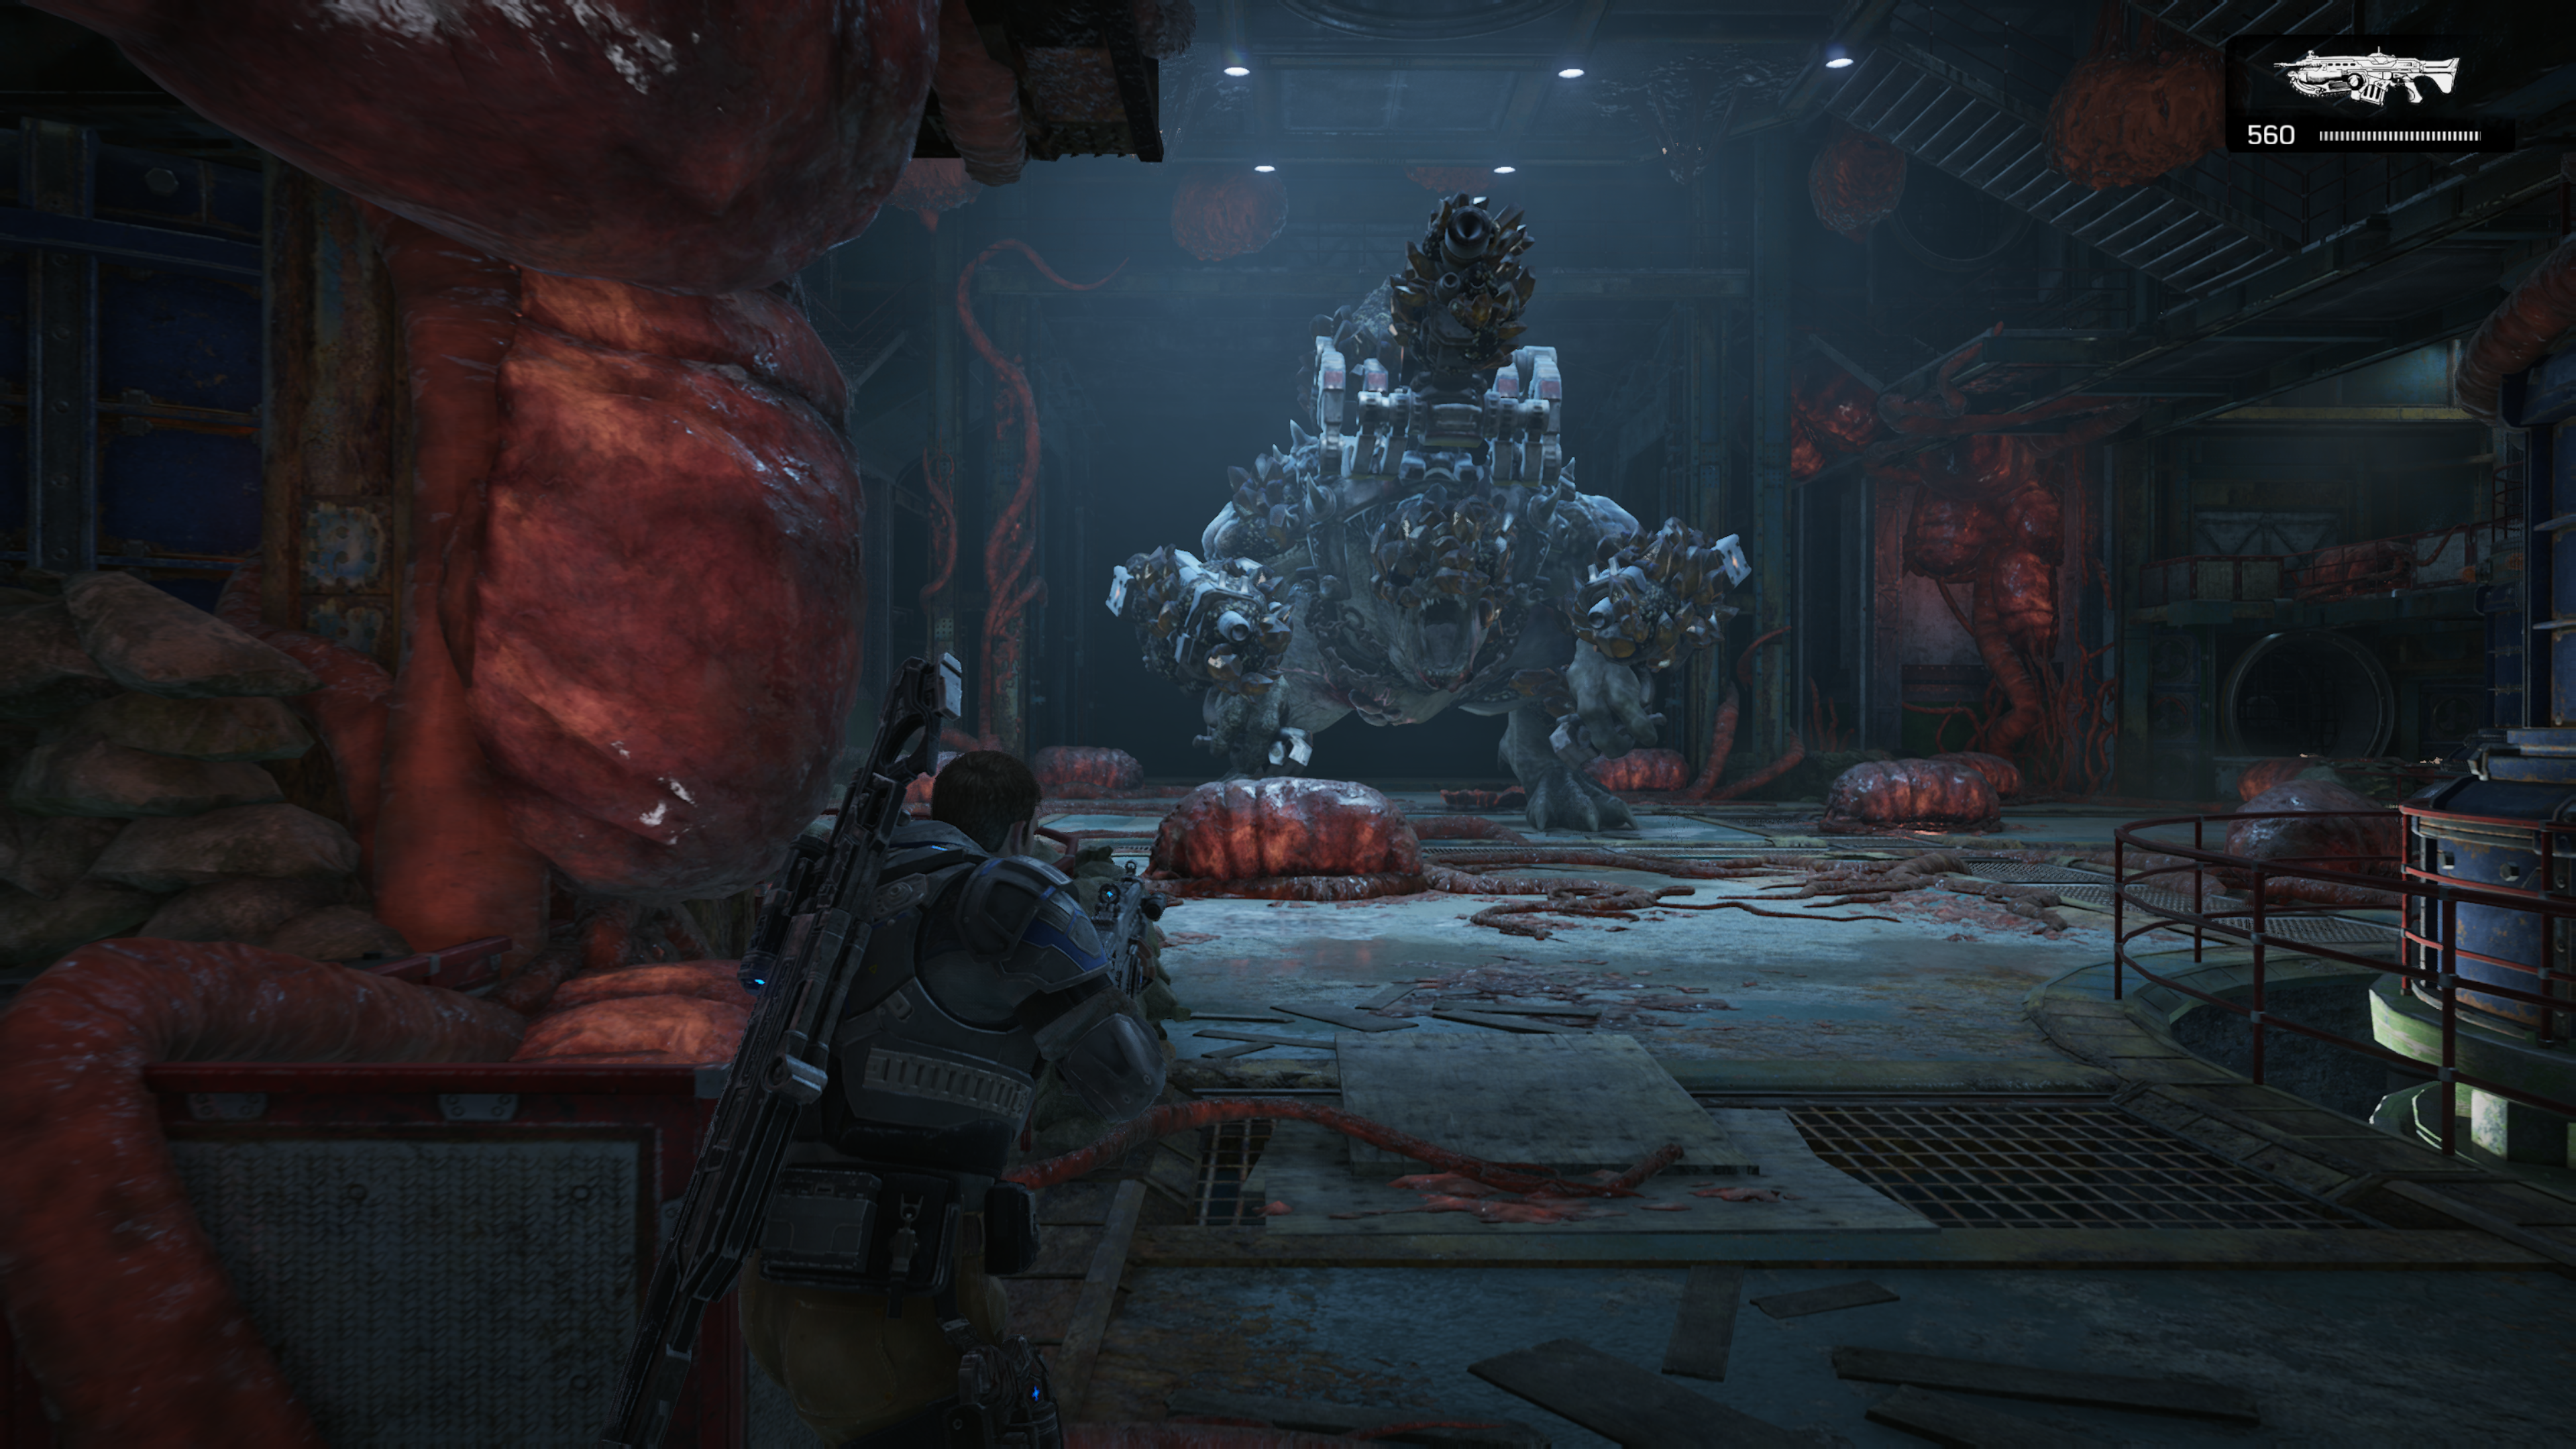 Gears of War 4 has split-screen multiplayer for everything